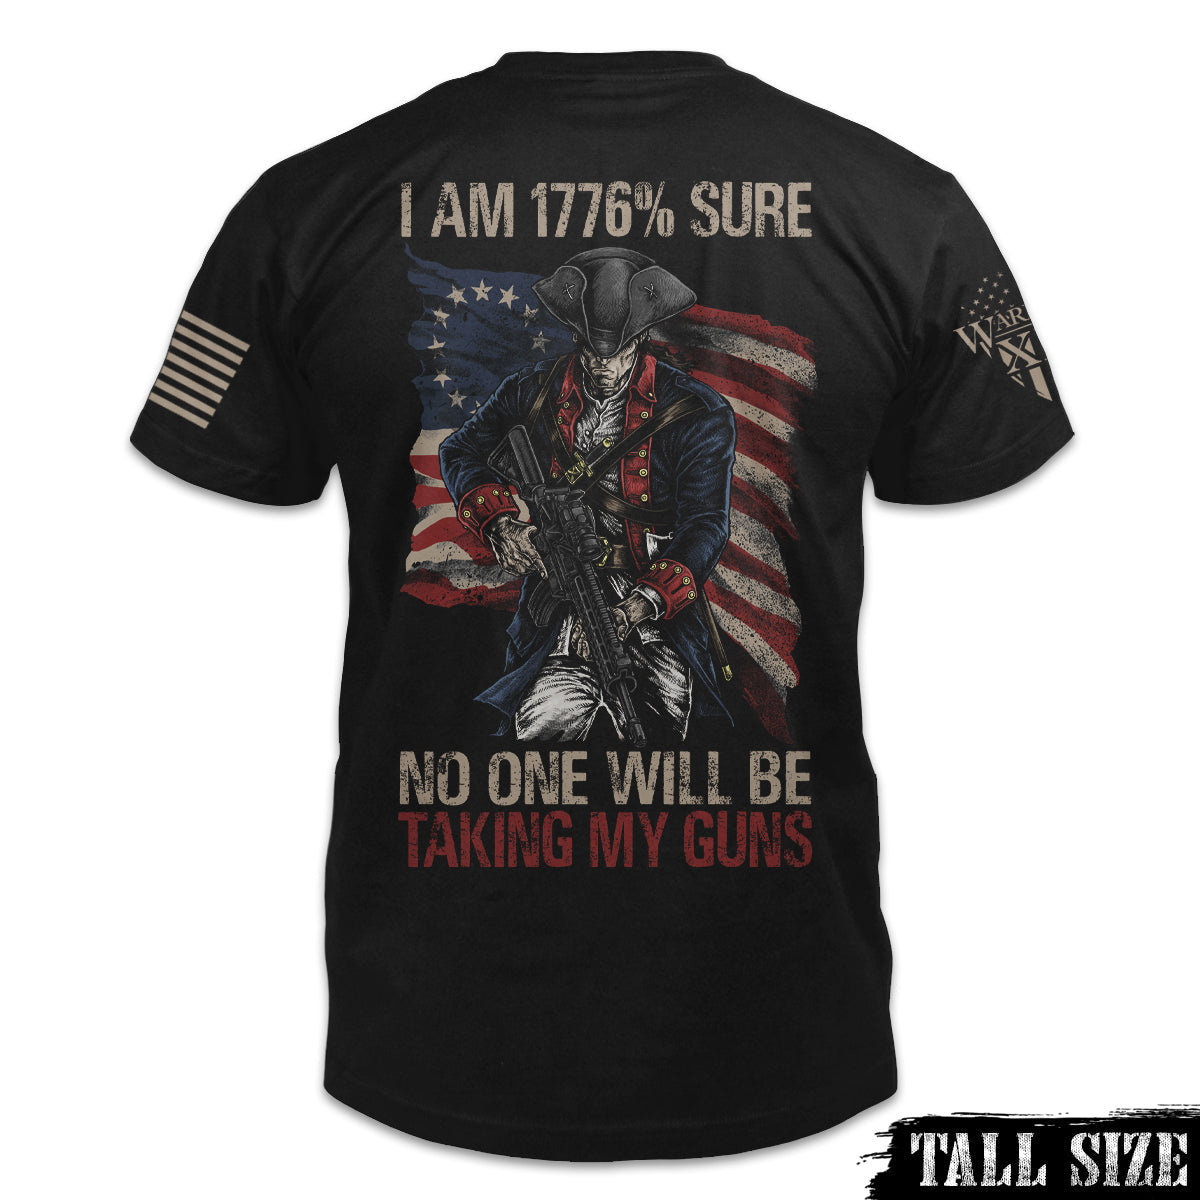 1776% Sure - Tall Size